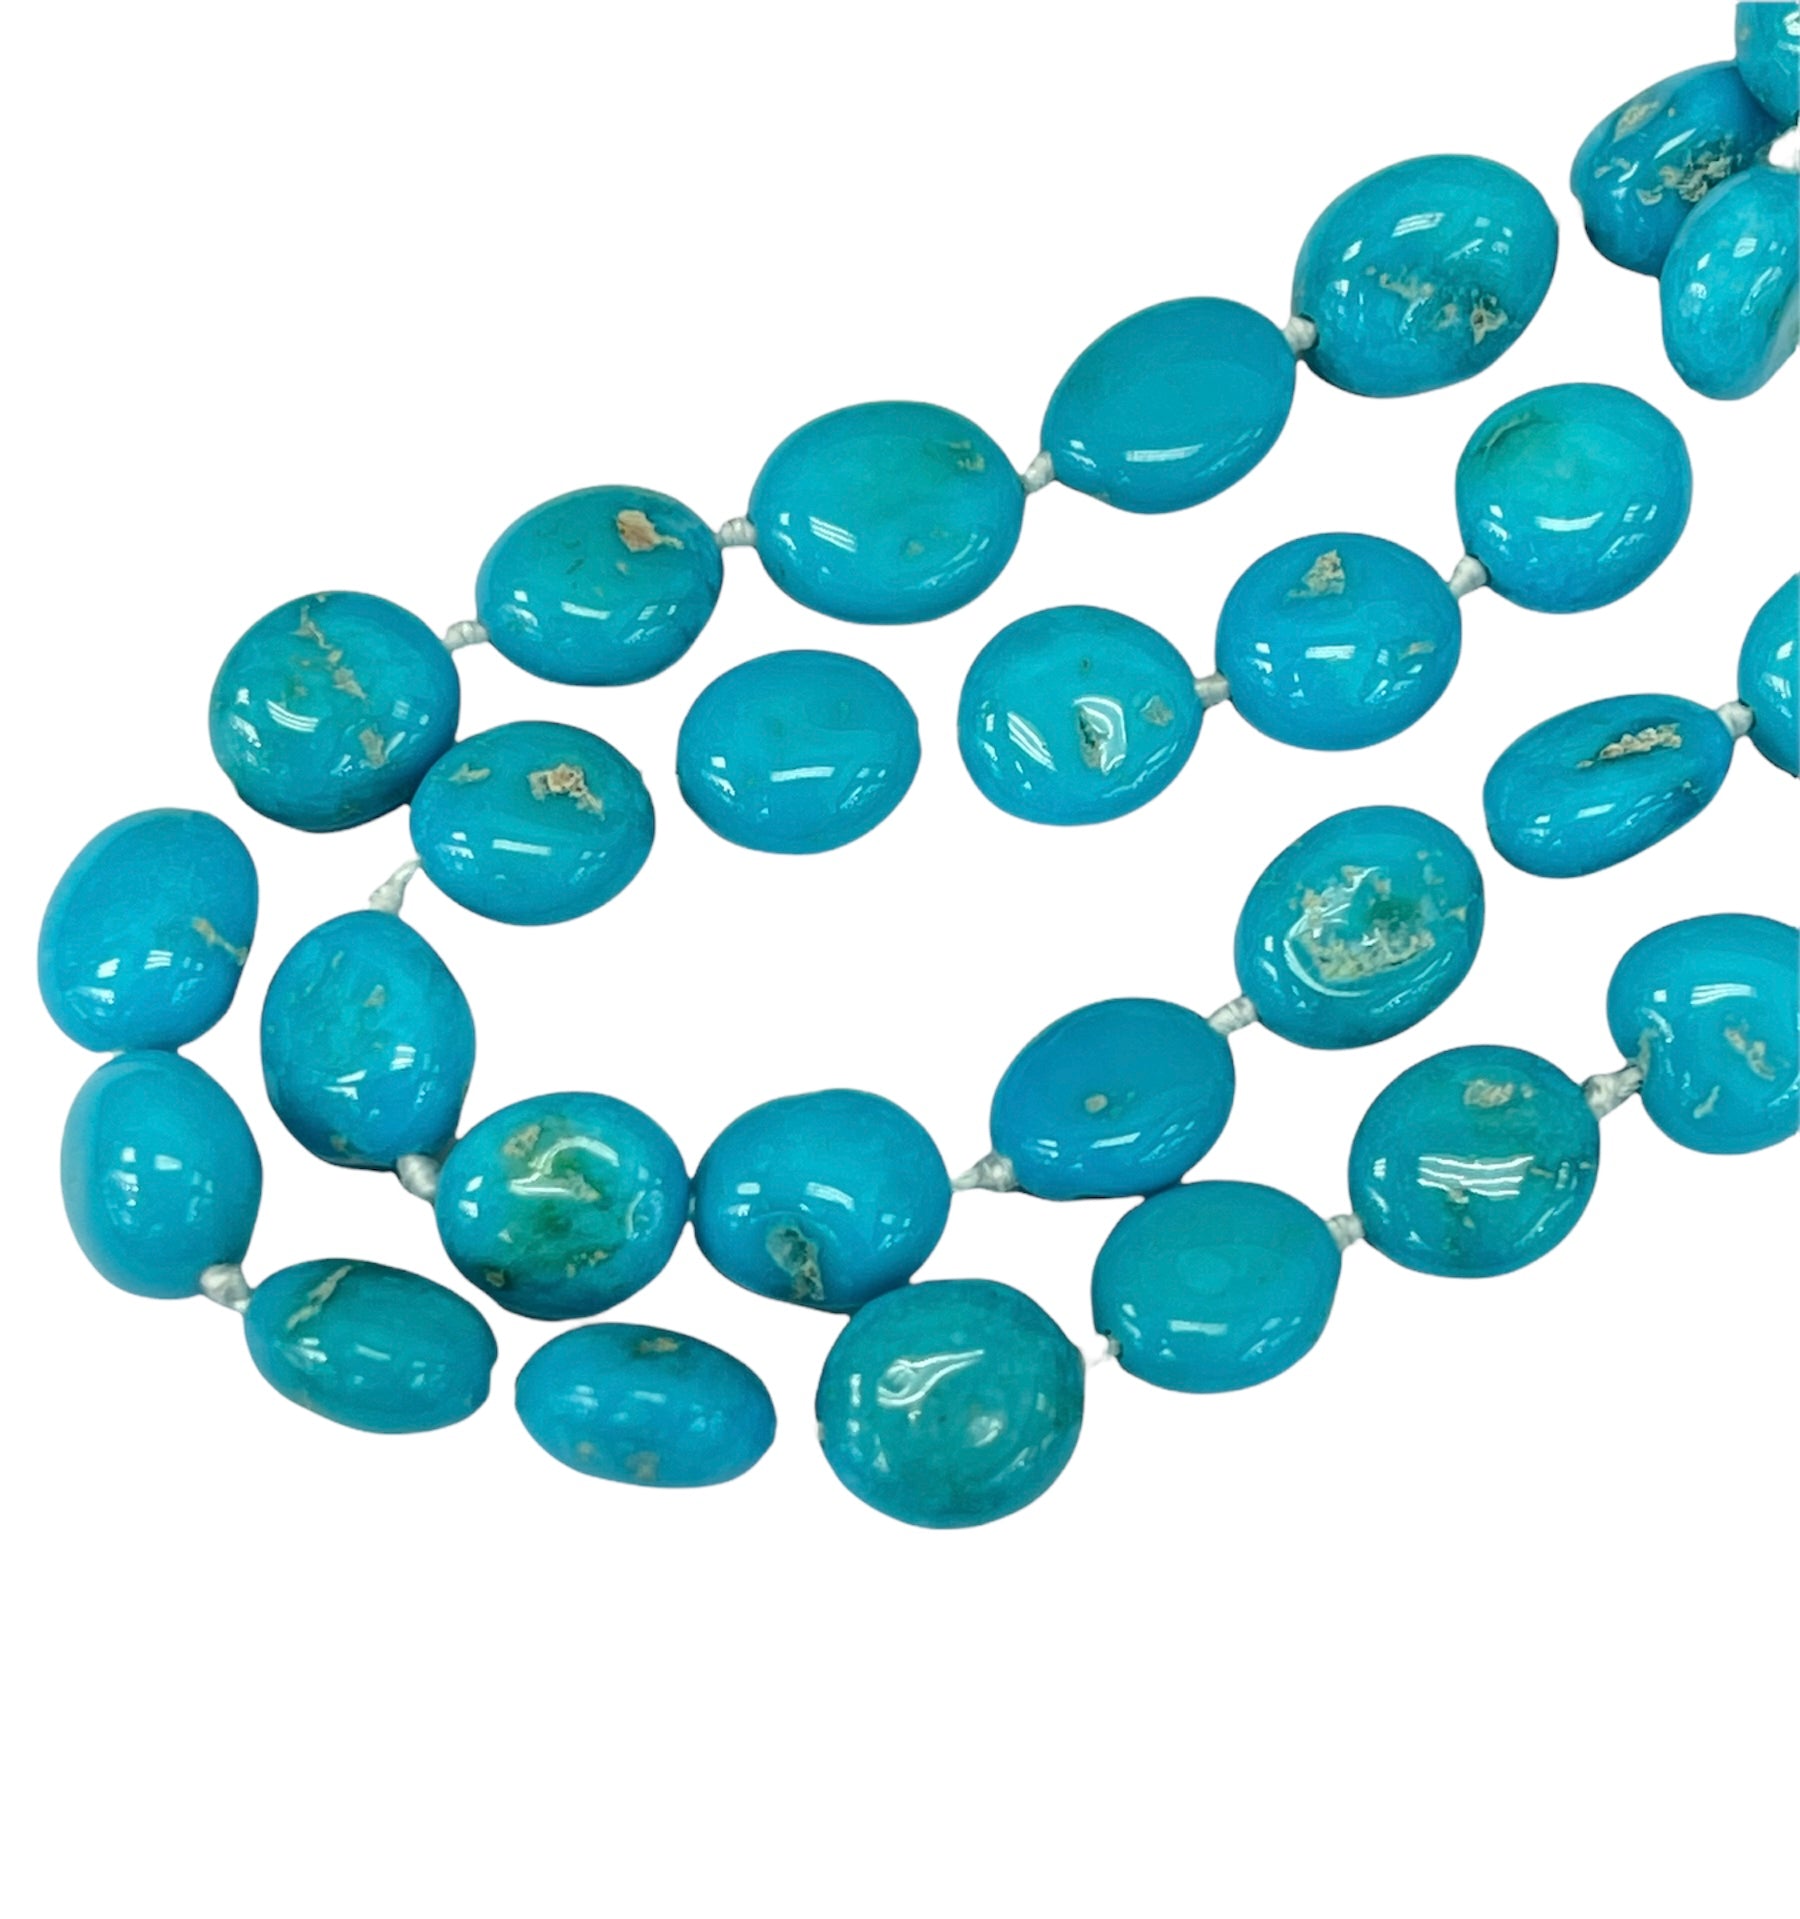 142.0 TCW Oblong Shape Persian Turquoise Bead String Necklace 14k 21 Inches